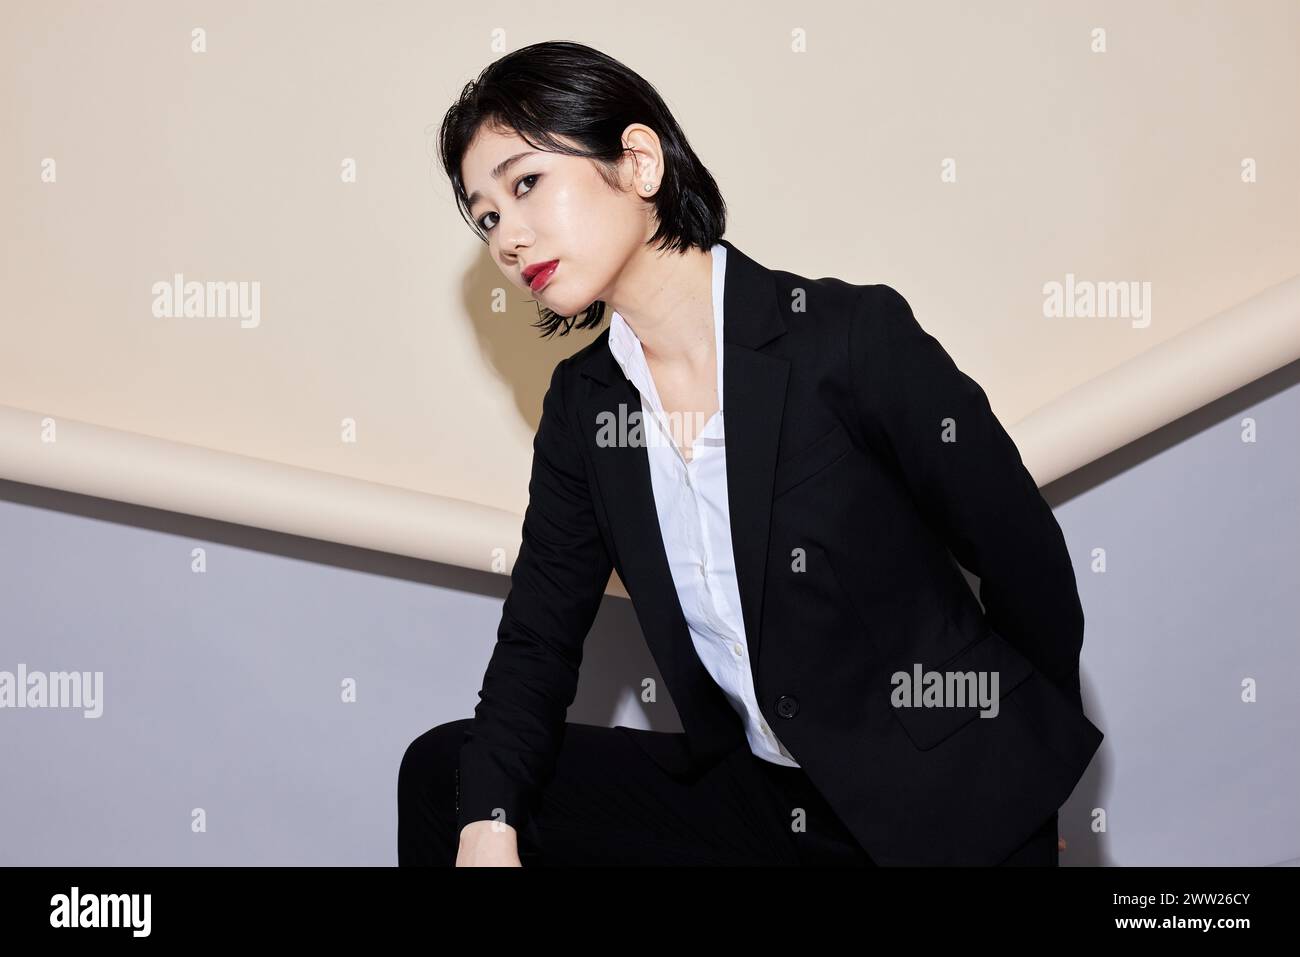 A woman in a business suit standing against a wall Stock Photo